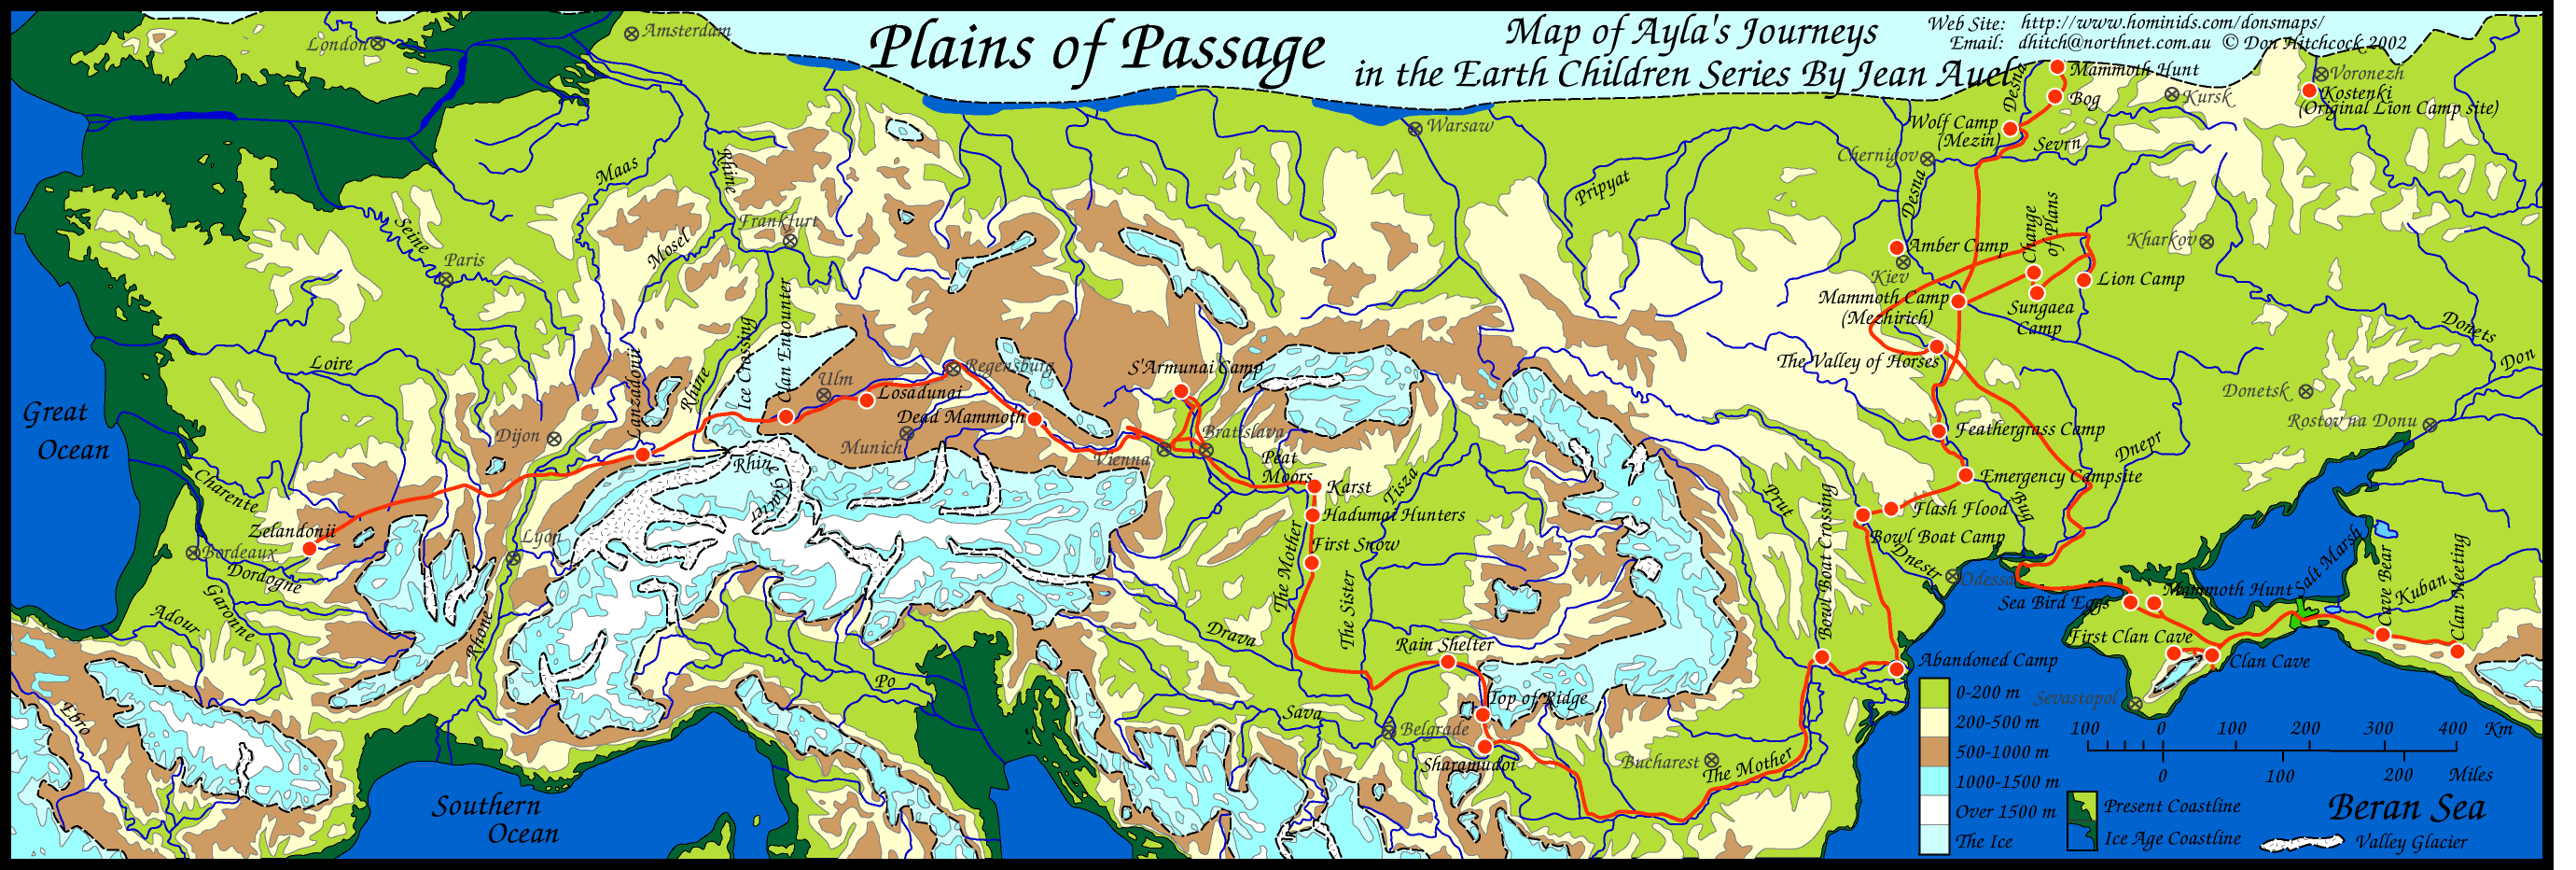 Earth Children Maps - All of Ayla's journeys including Plains of Passage